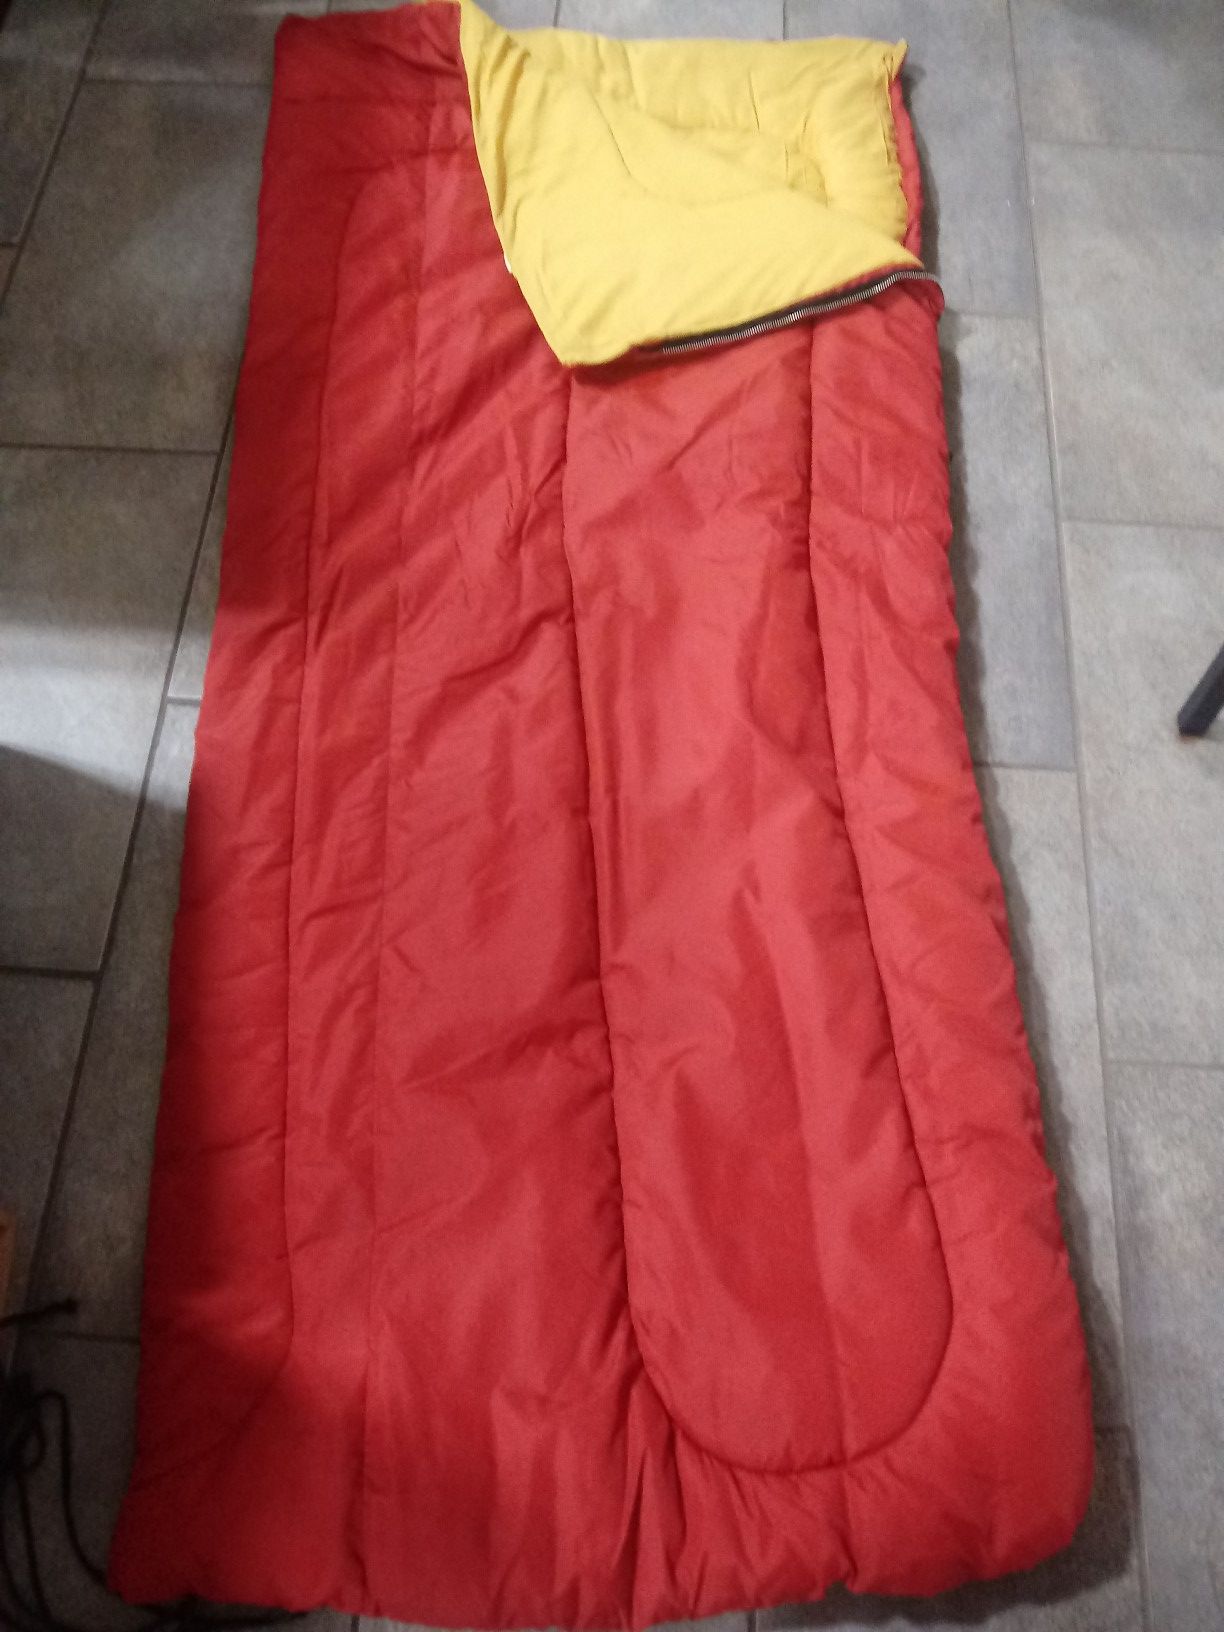 Adult...sleeping bag...great condition"